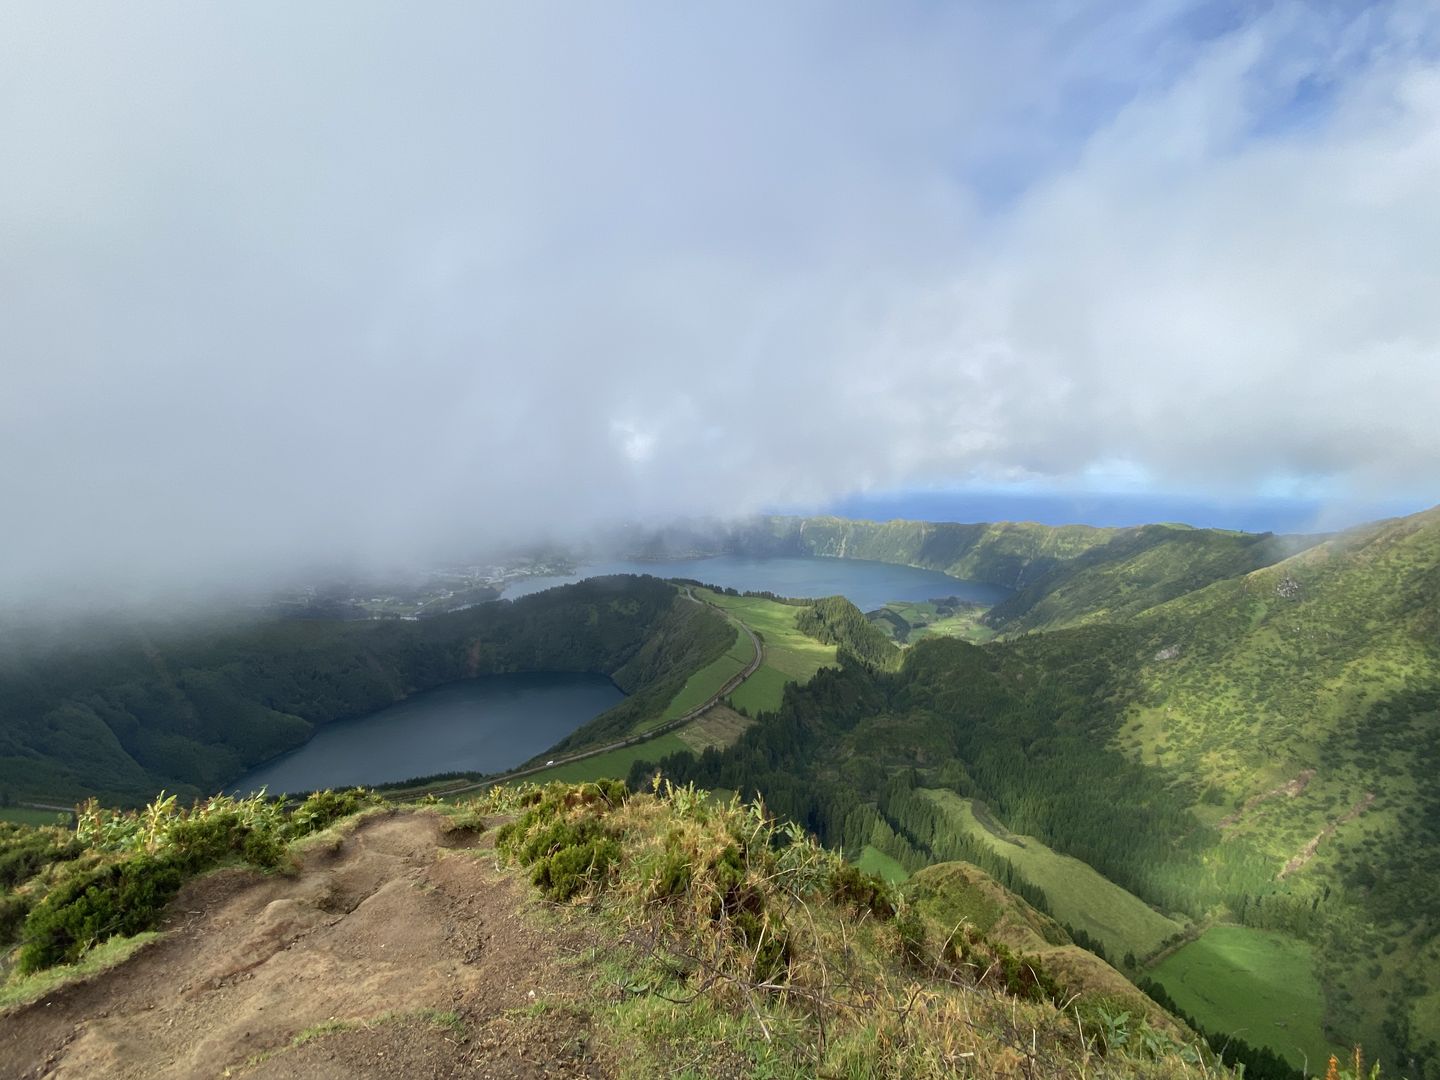 A view from the top of a mountain overlooking a lake and clouds.